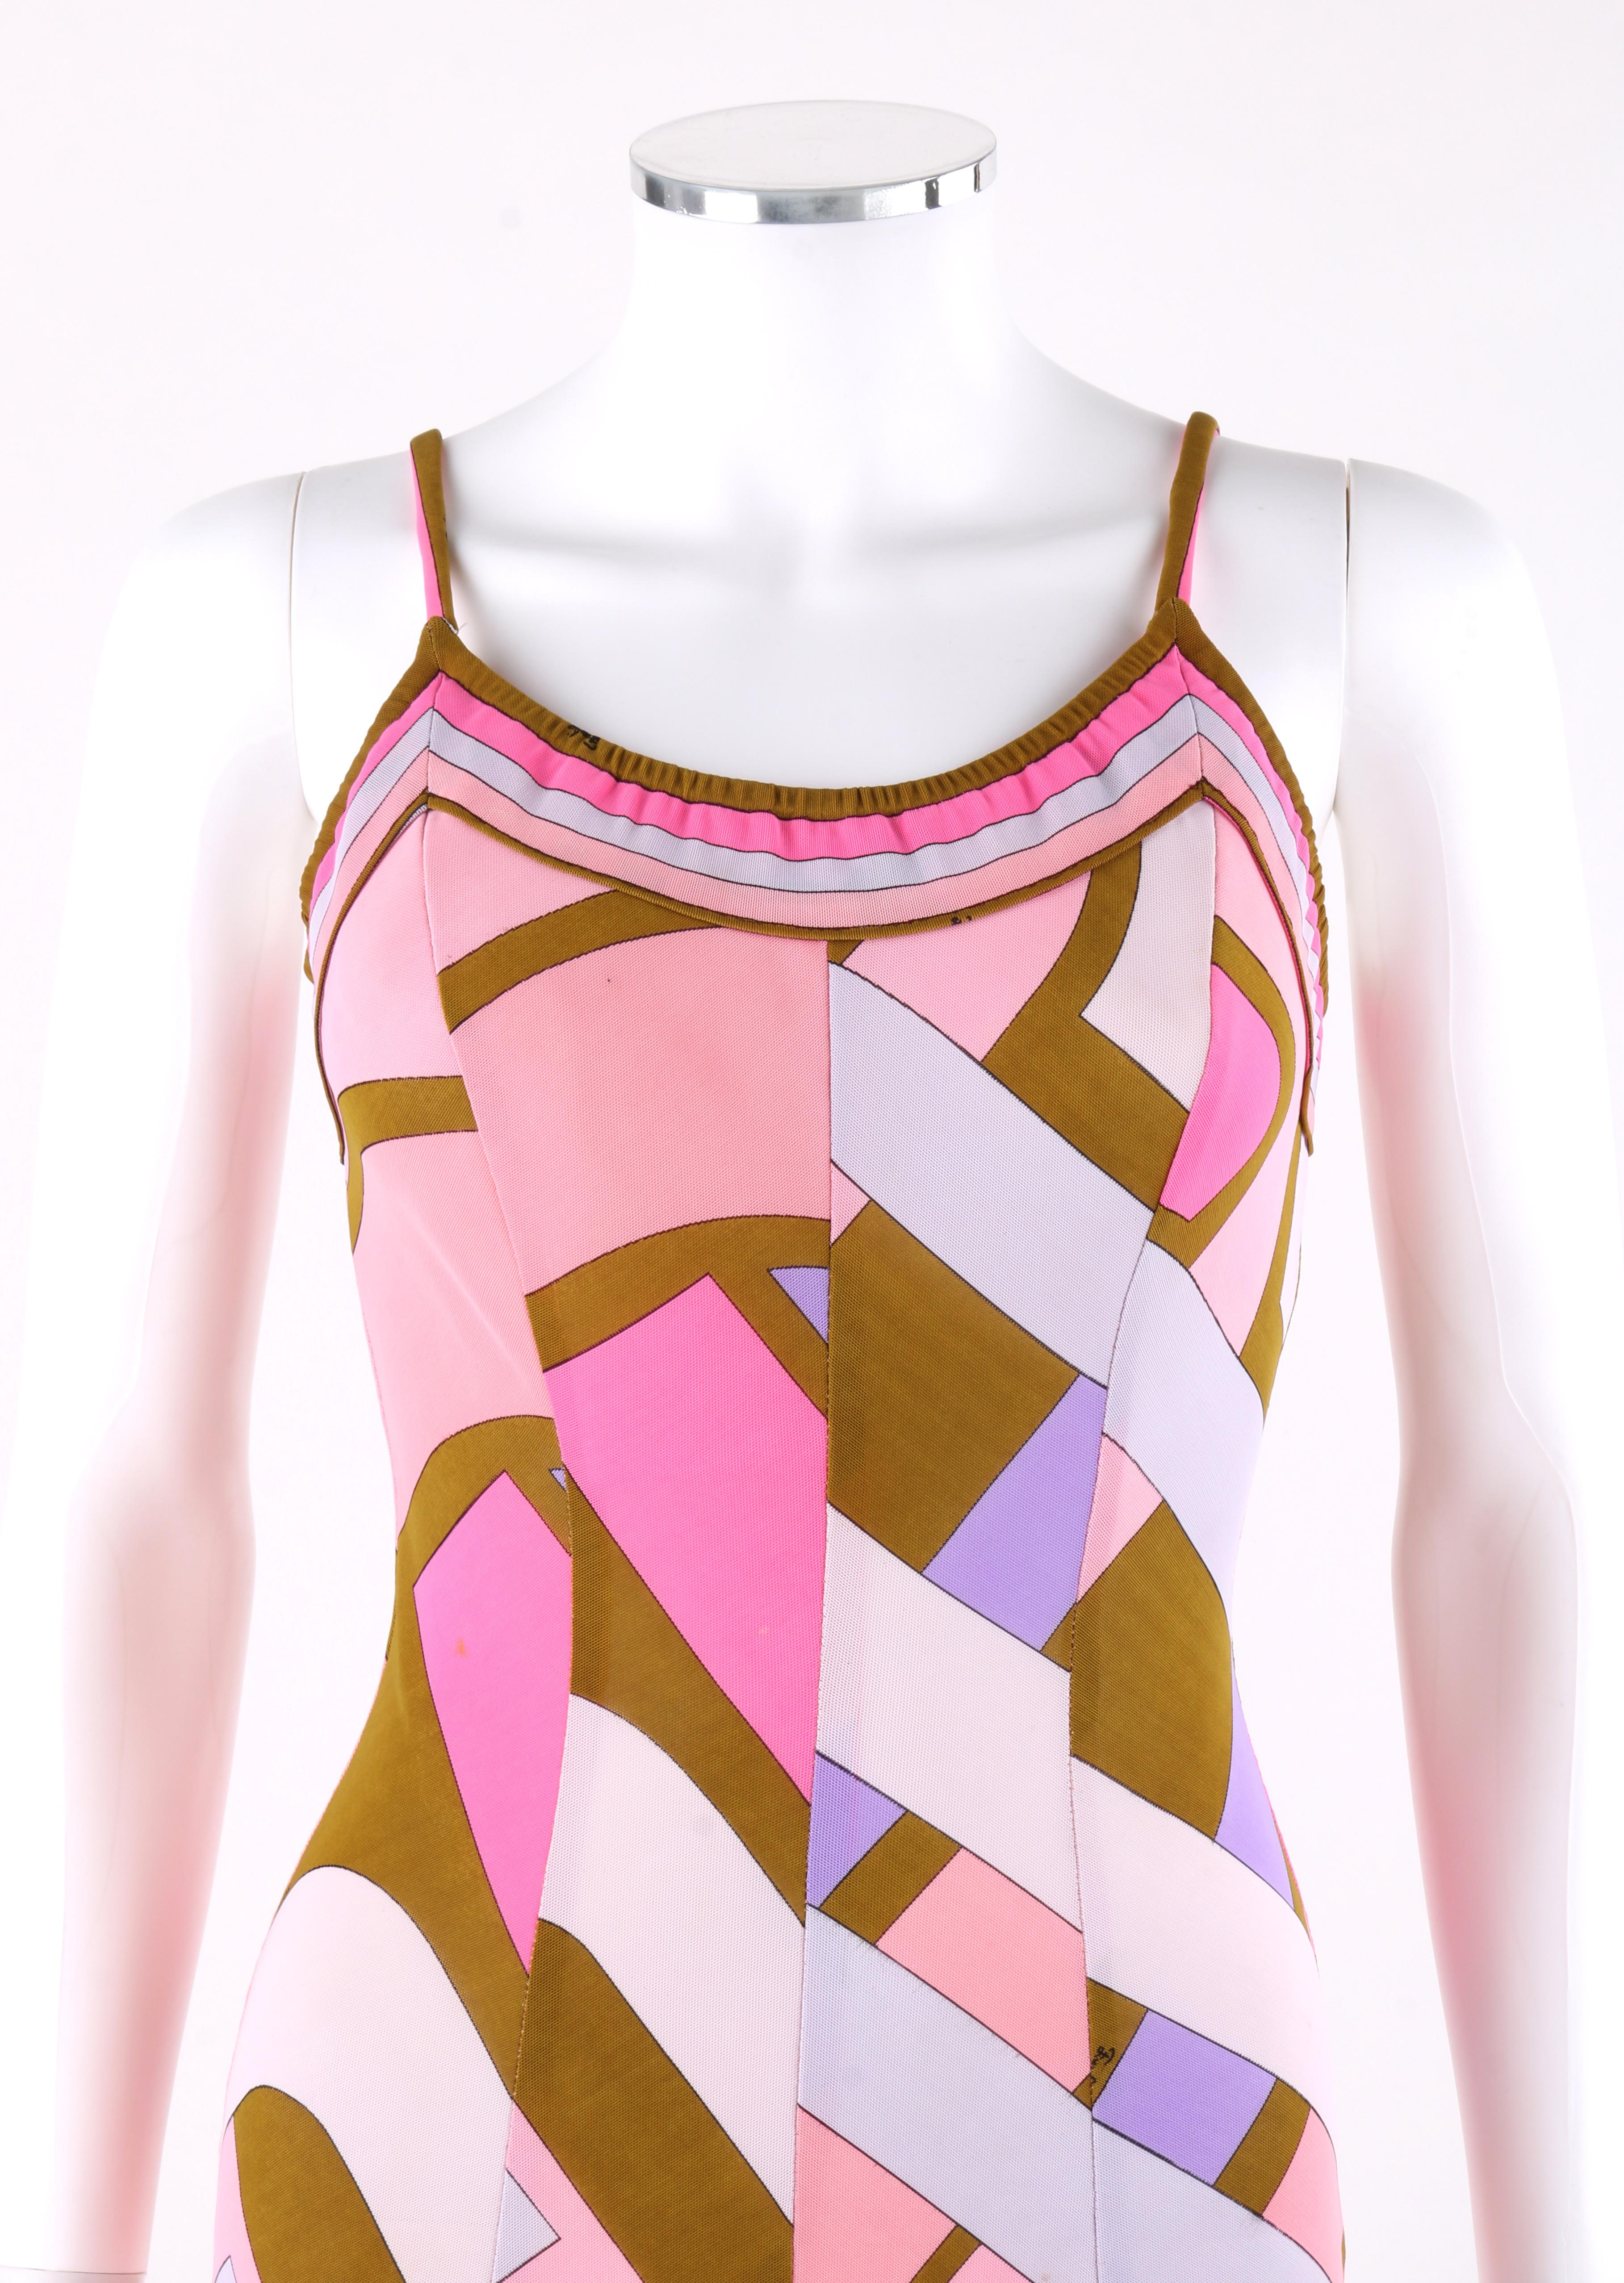 EMILIO PUCCI c.1960’s Pink Signature Print One-Piece Bathing Swimsuit 
 
Circa: 1960’s
Label(s): Emilio Pucci / Lord & Taylor 
Style: One-piece bathing swimsuit 
Color(s): Shades of pink, purple, brown, grey and white. 
Lined: Yes
Marked Fabric